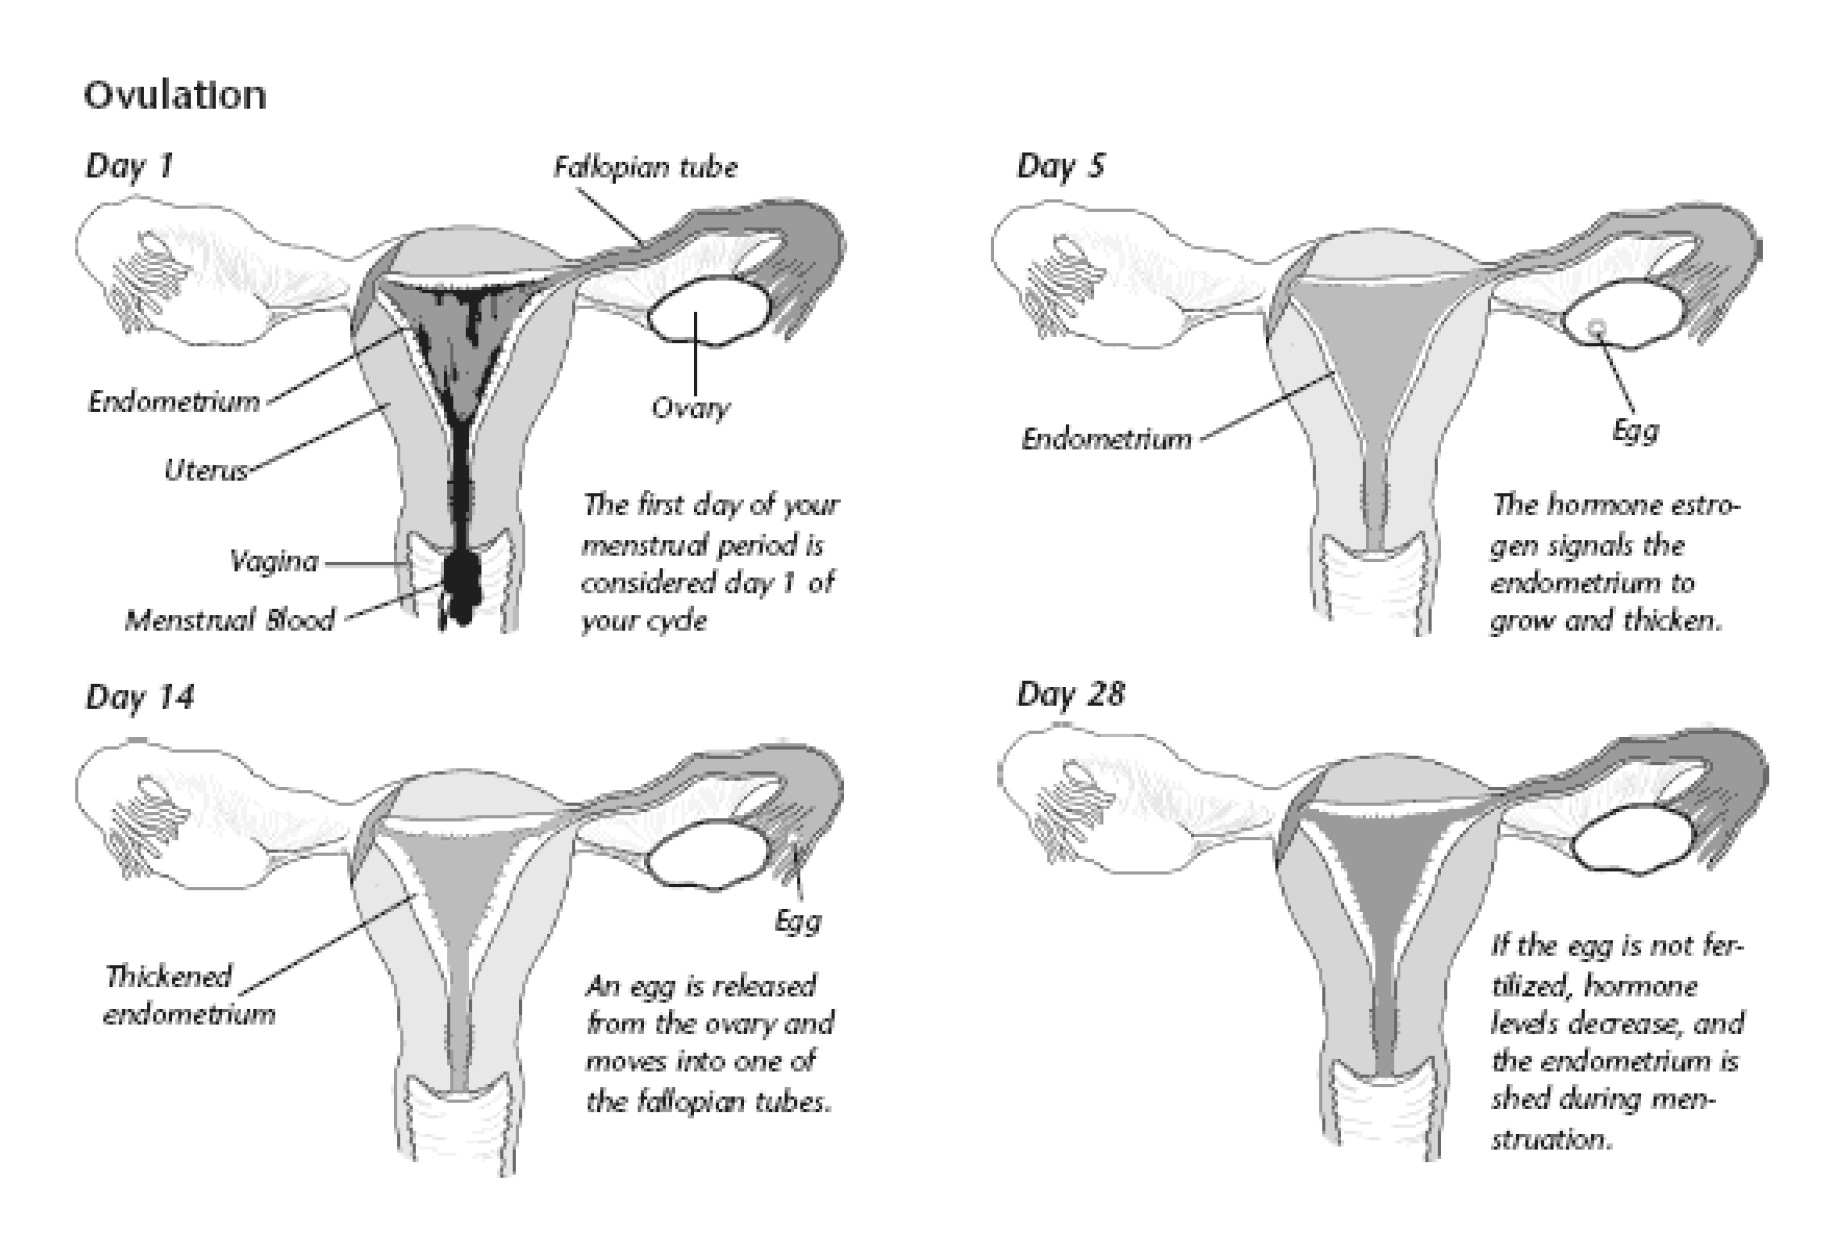 Symptoms of Ovulation During Perimenopause